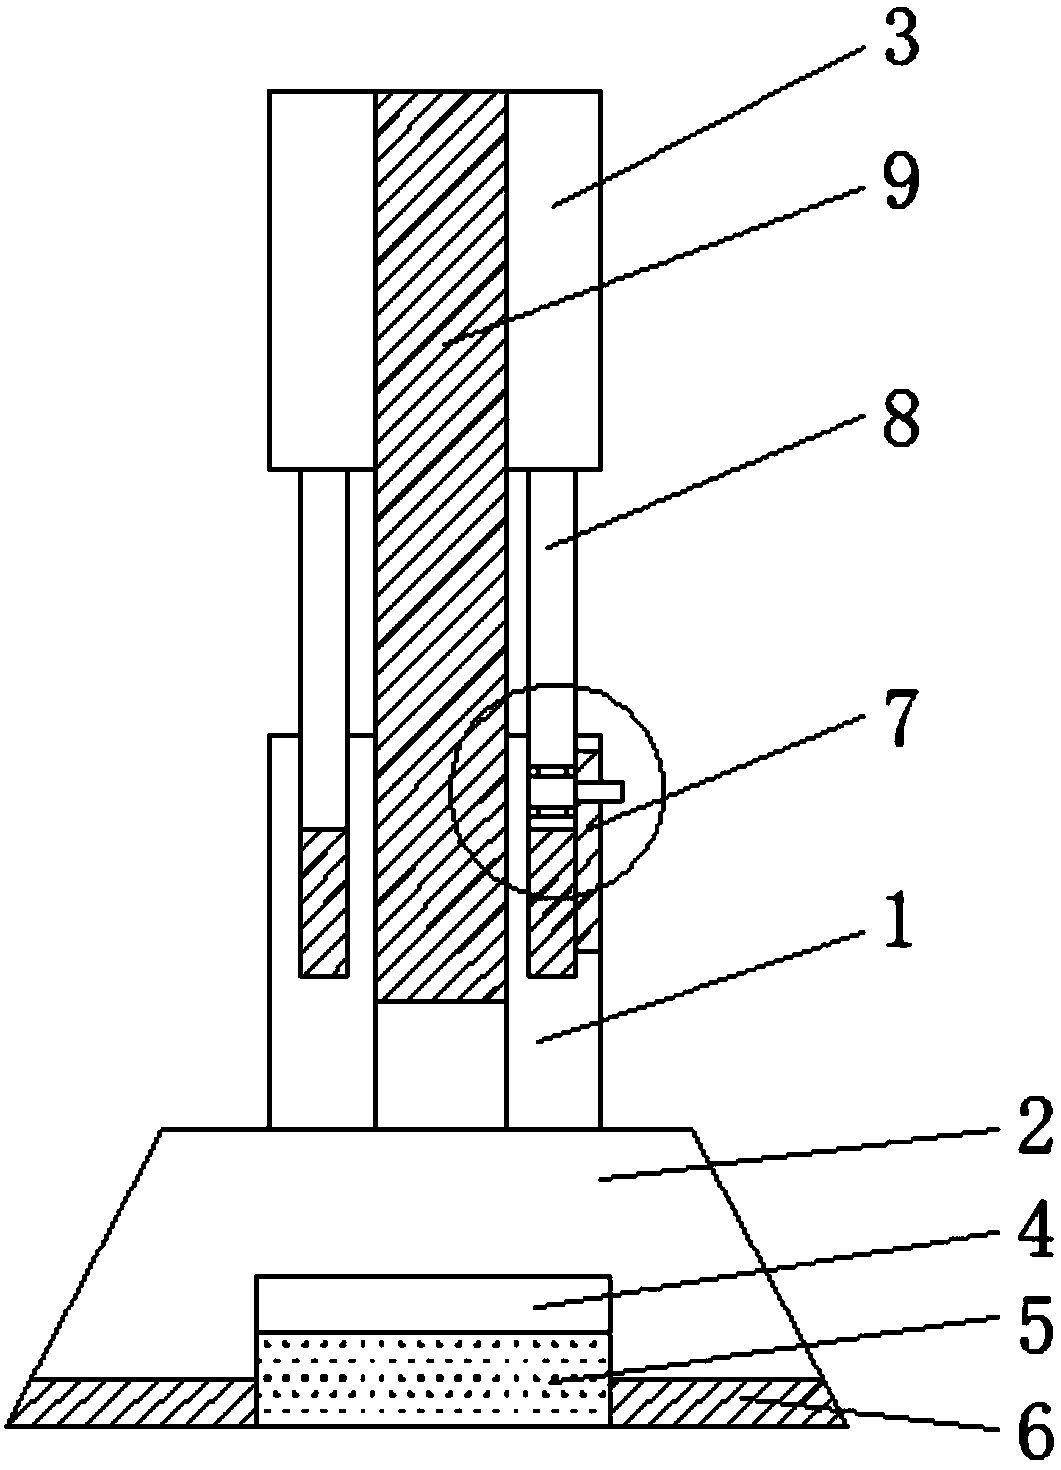 Prefabricated column with adjustable size